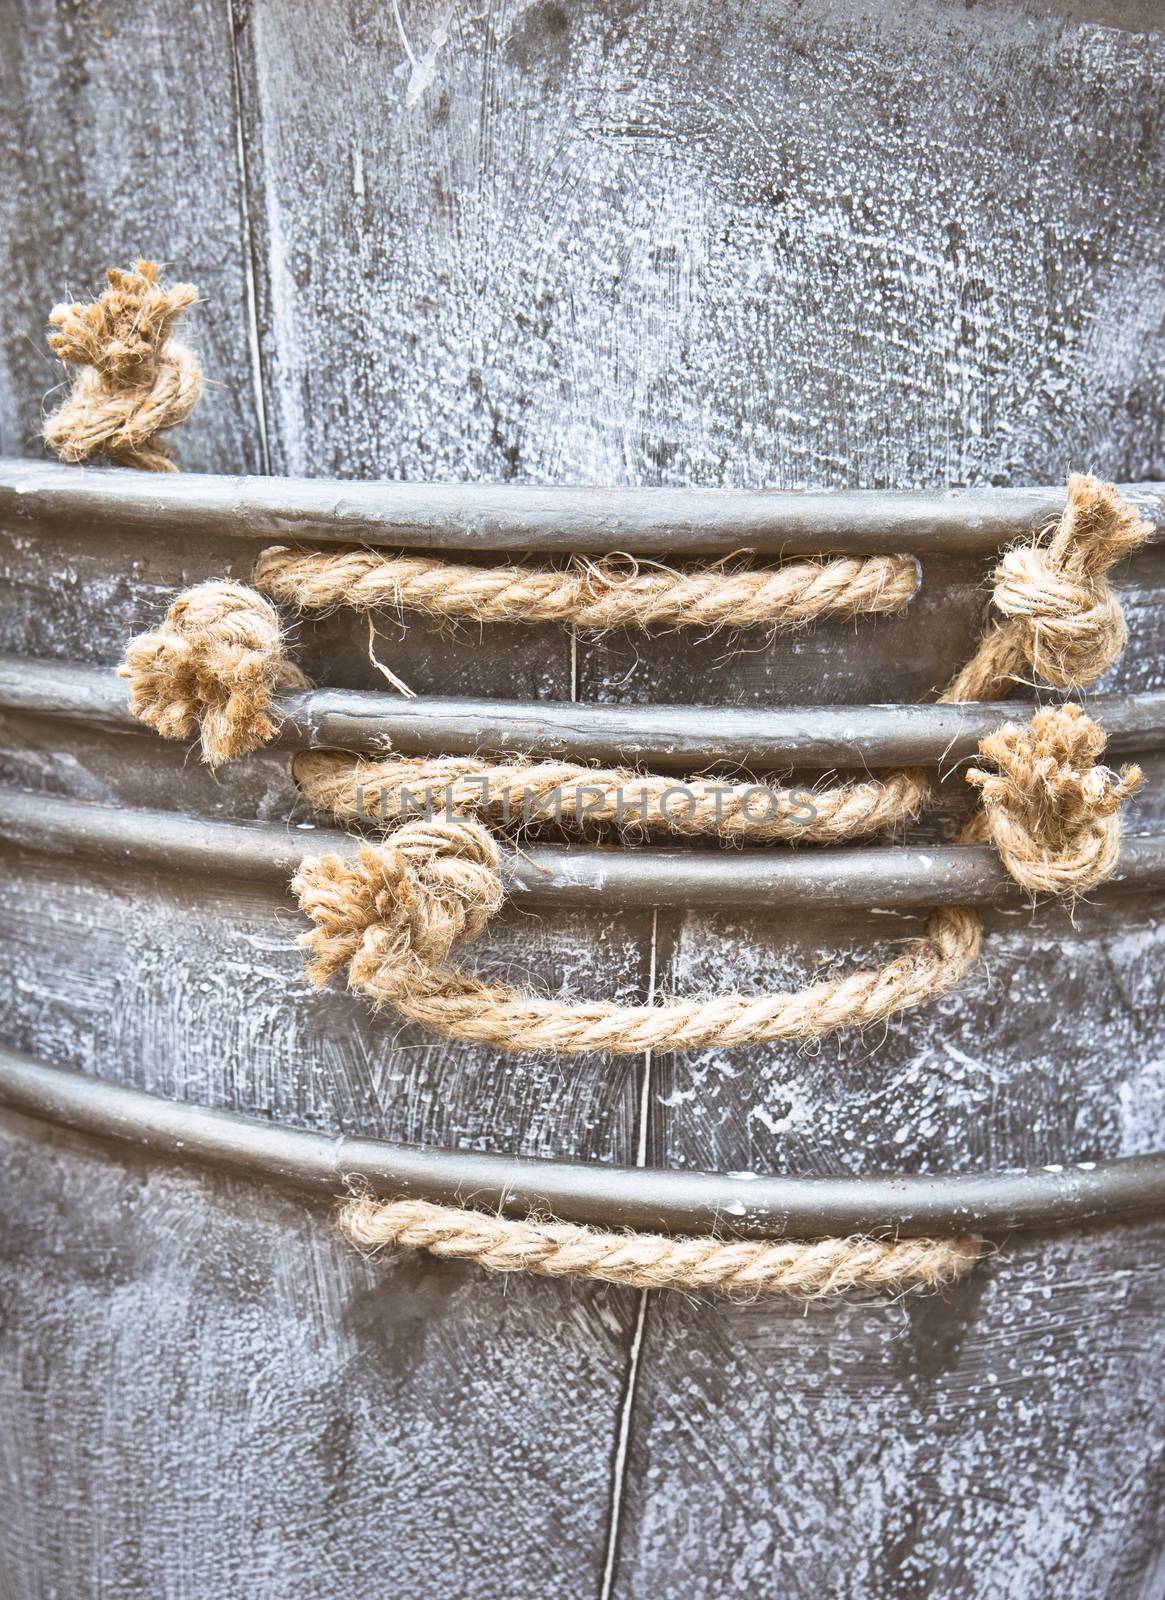 Close up of the edge of a pile of metal containers with rope handles